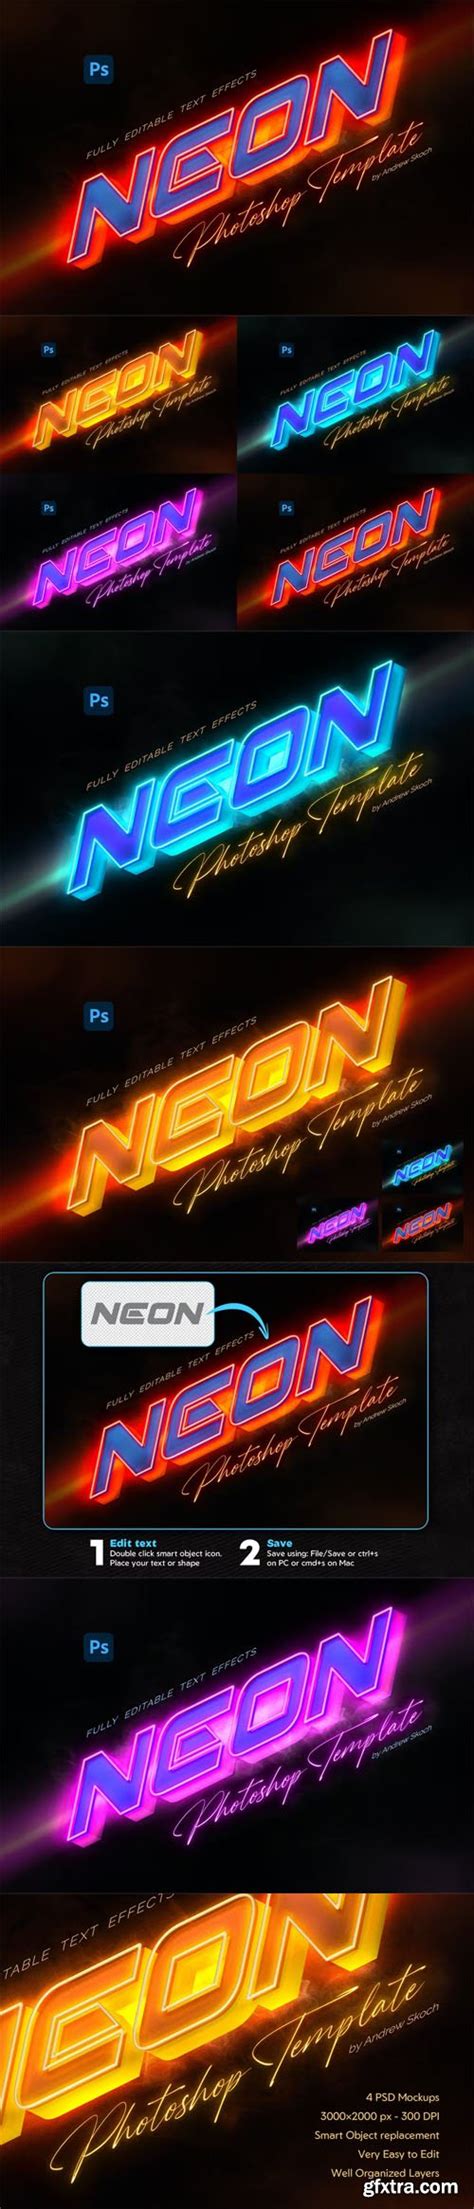 Neon Text Effect Photoshop Template Gfxtra